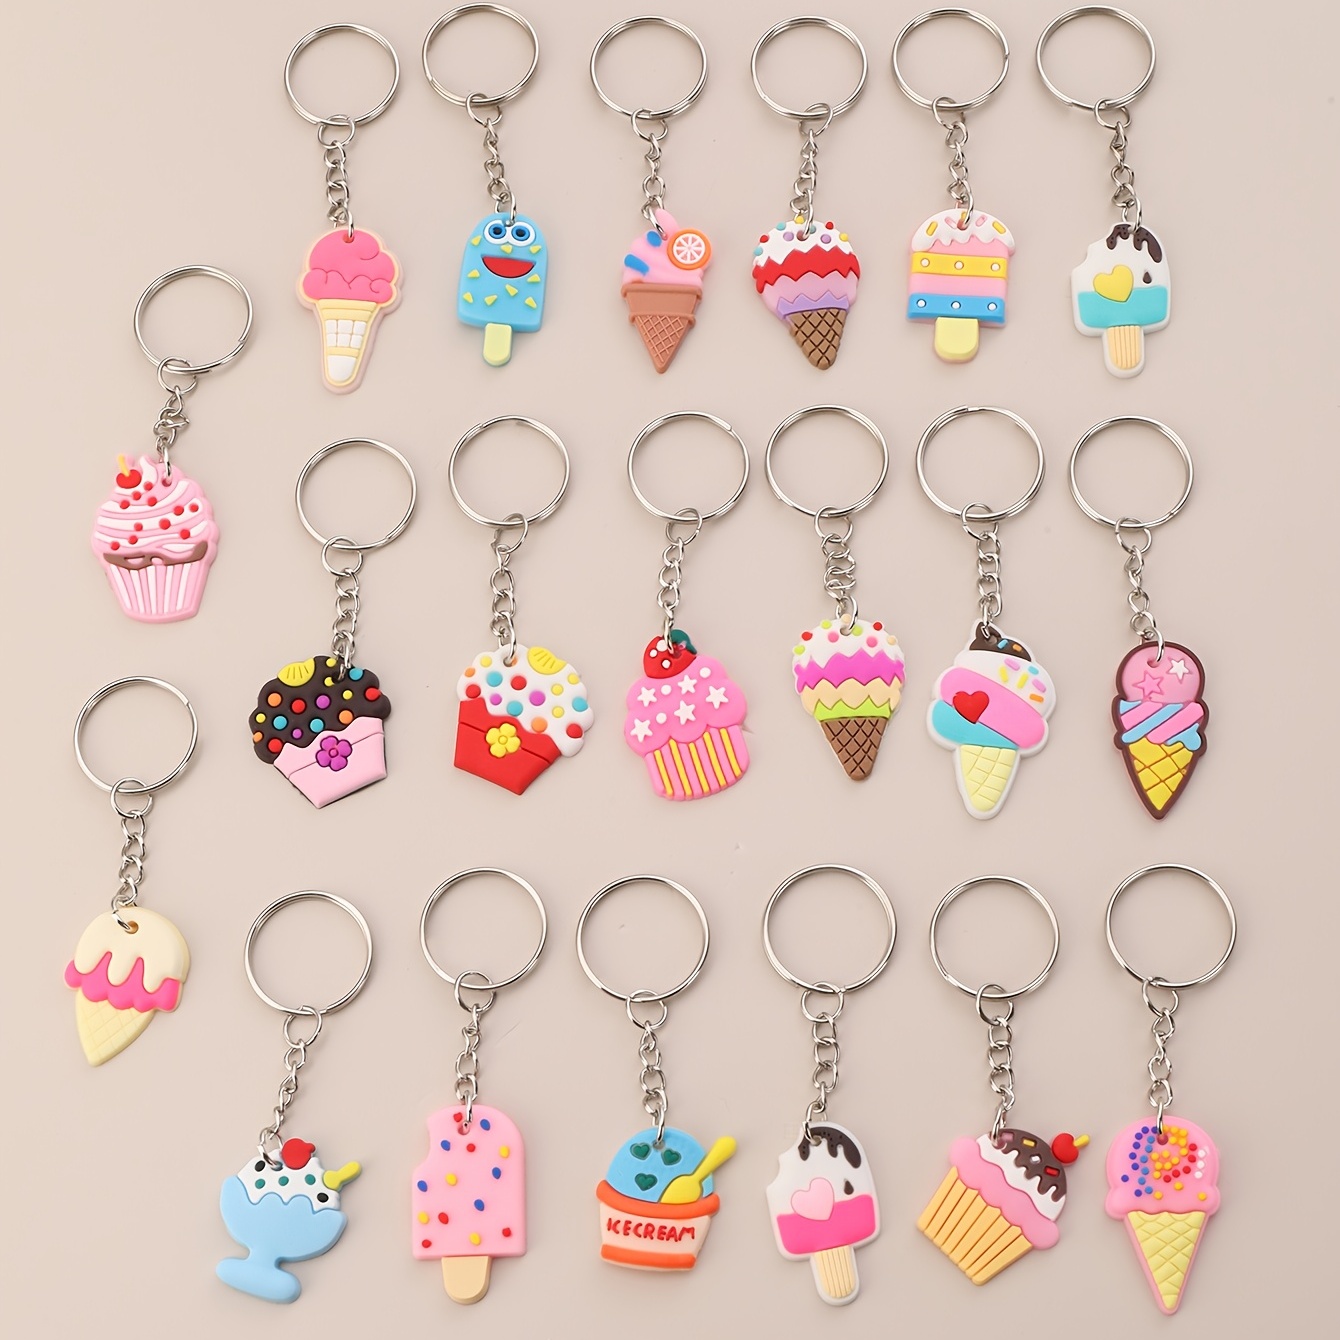 20pcs Ice Cream Keychain Party Favors for Kids